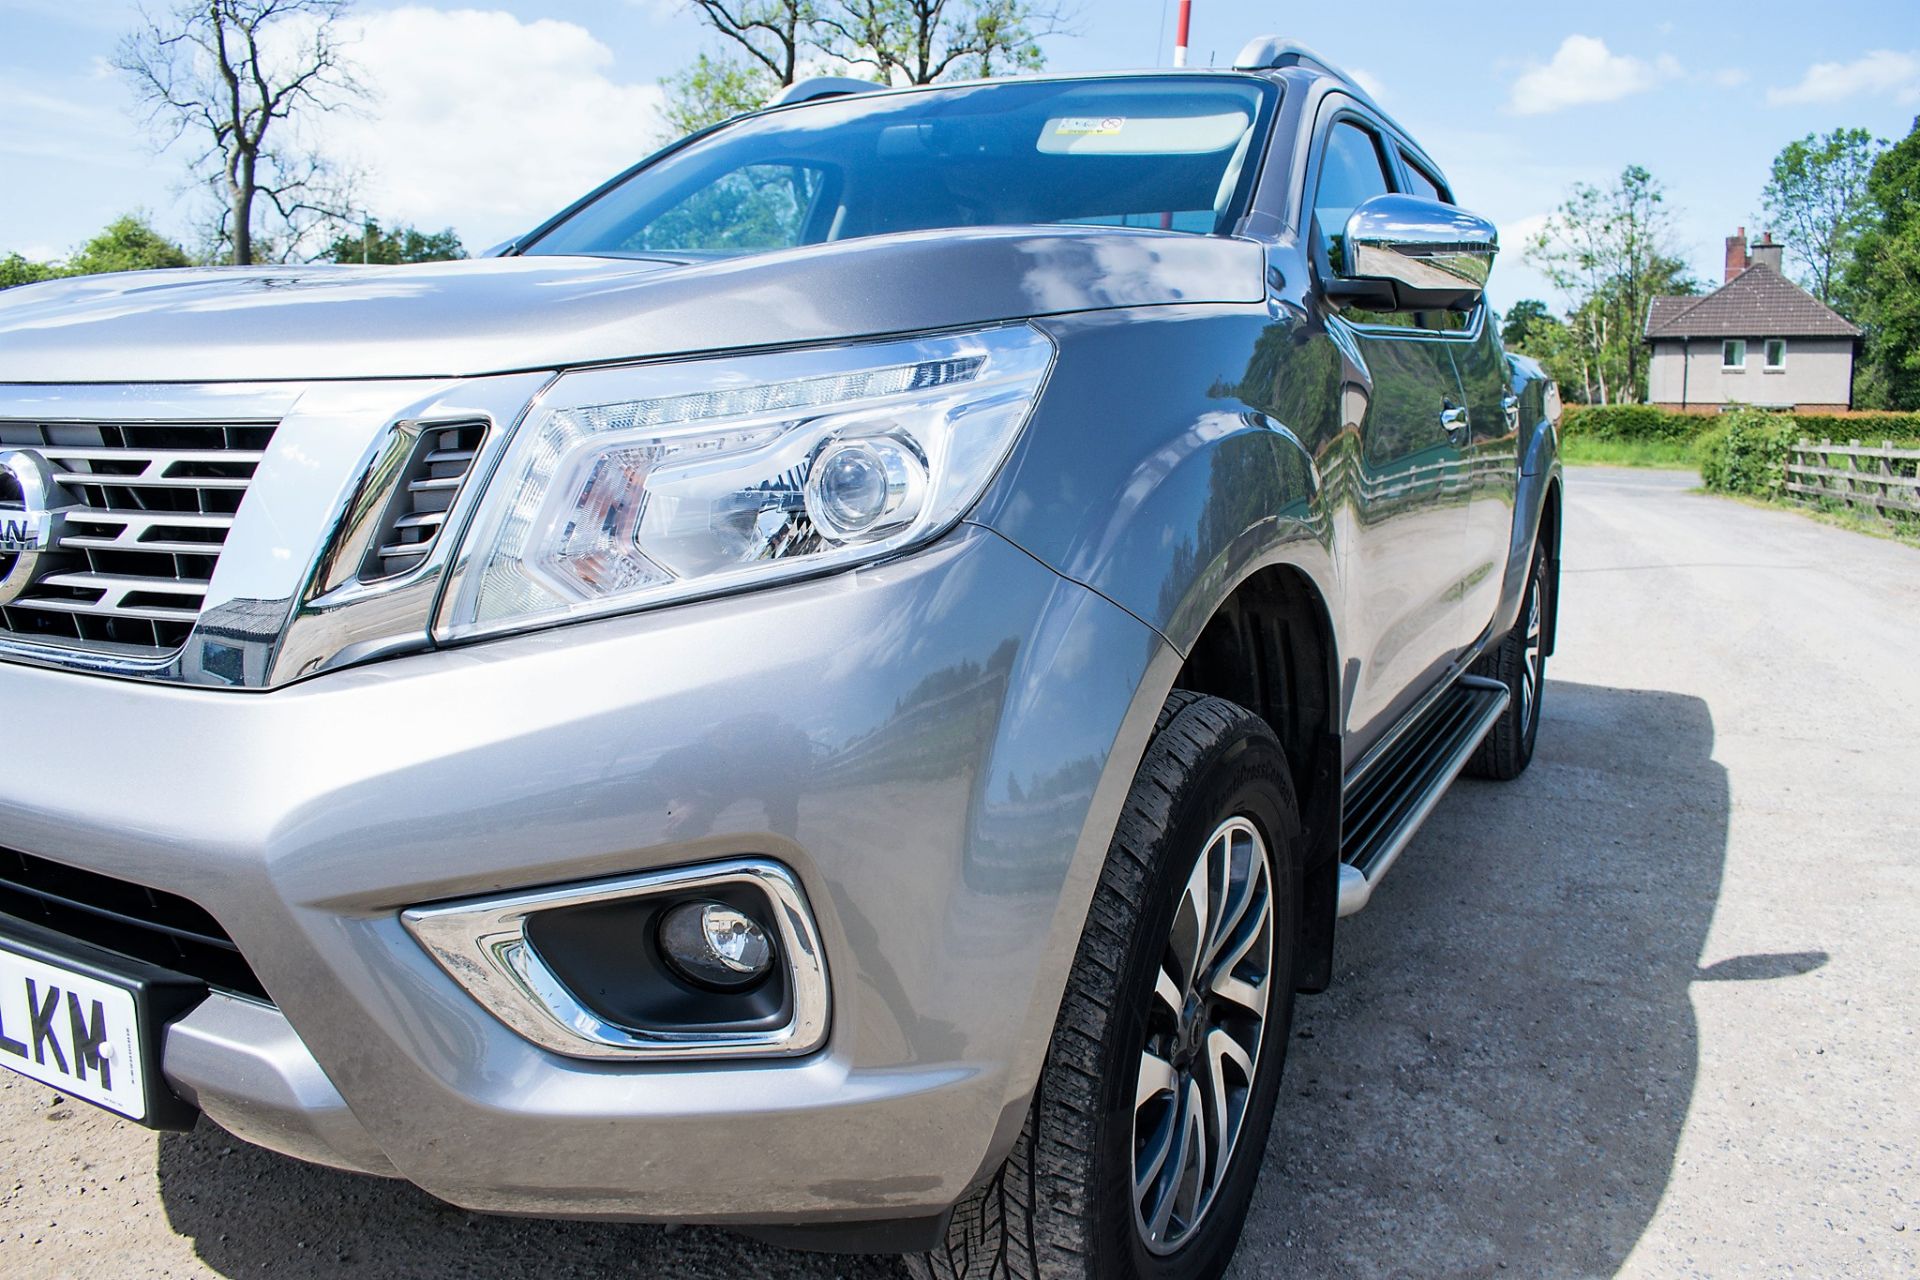 Nissan Navara Tekna DCi Auto double cab pick up truck Registration Number: BL68 LKM Date of - Image 11 of 25